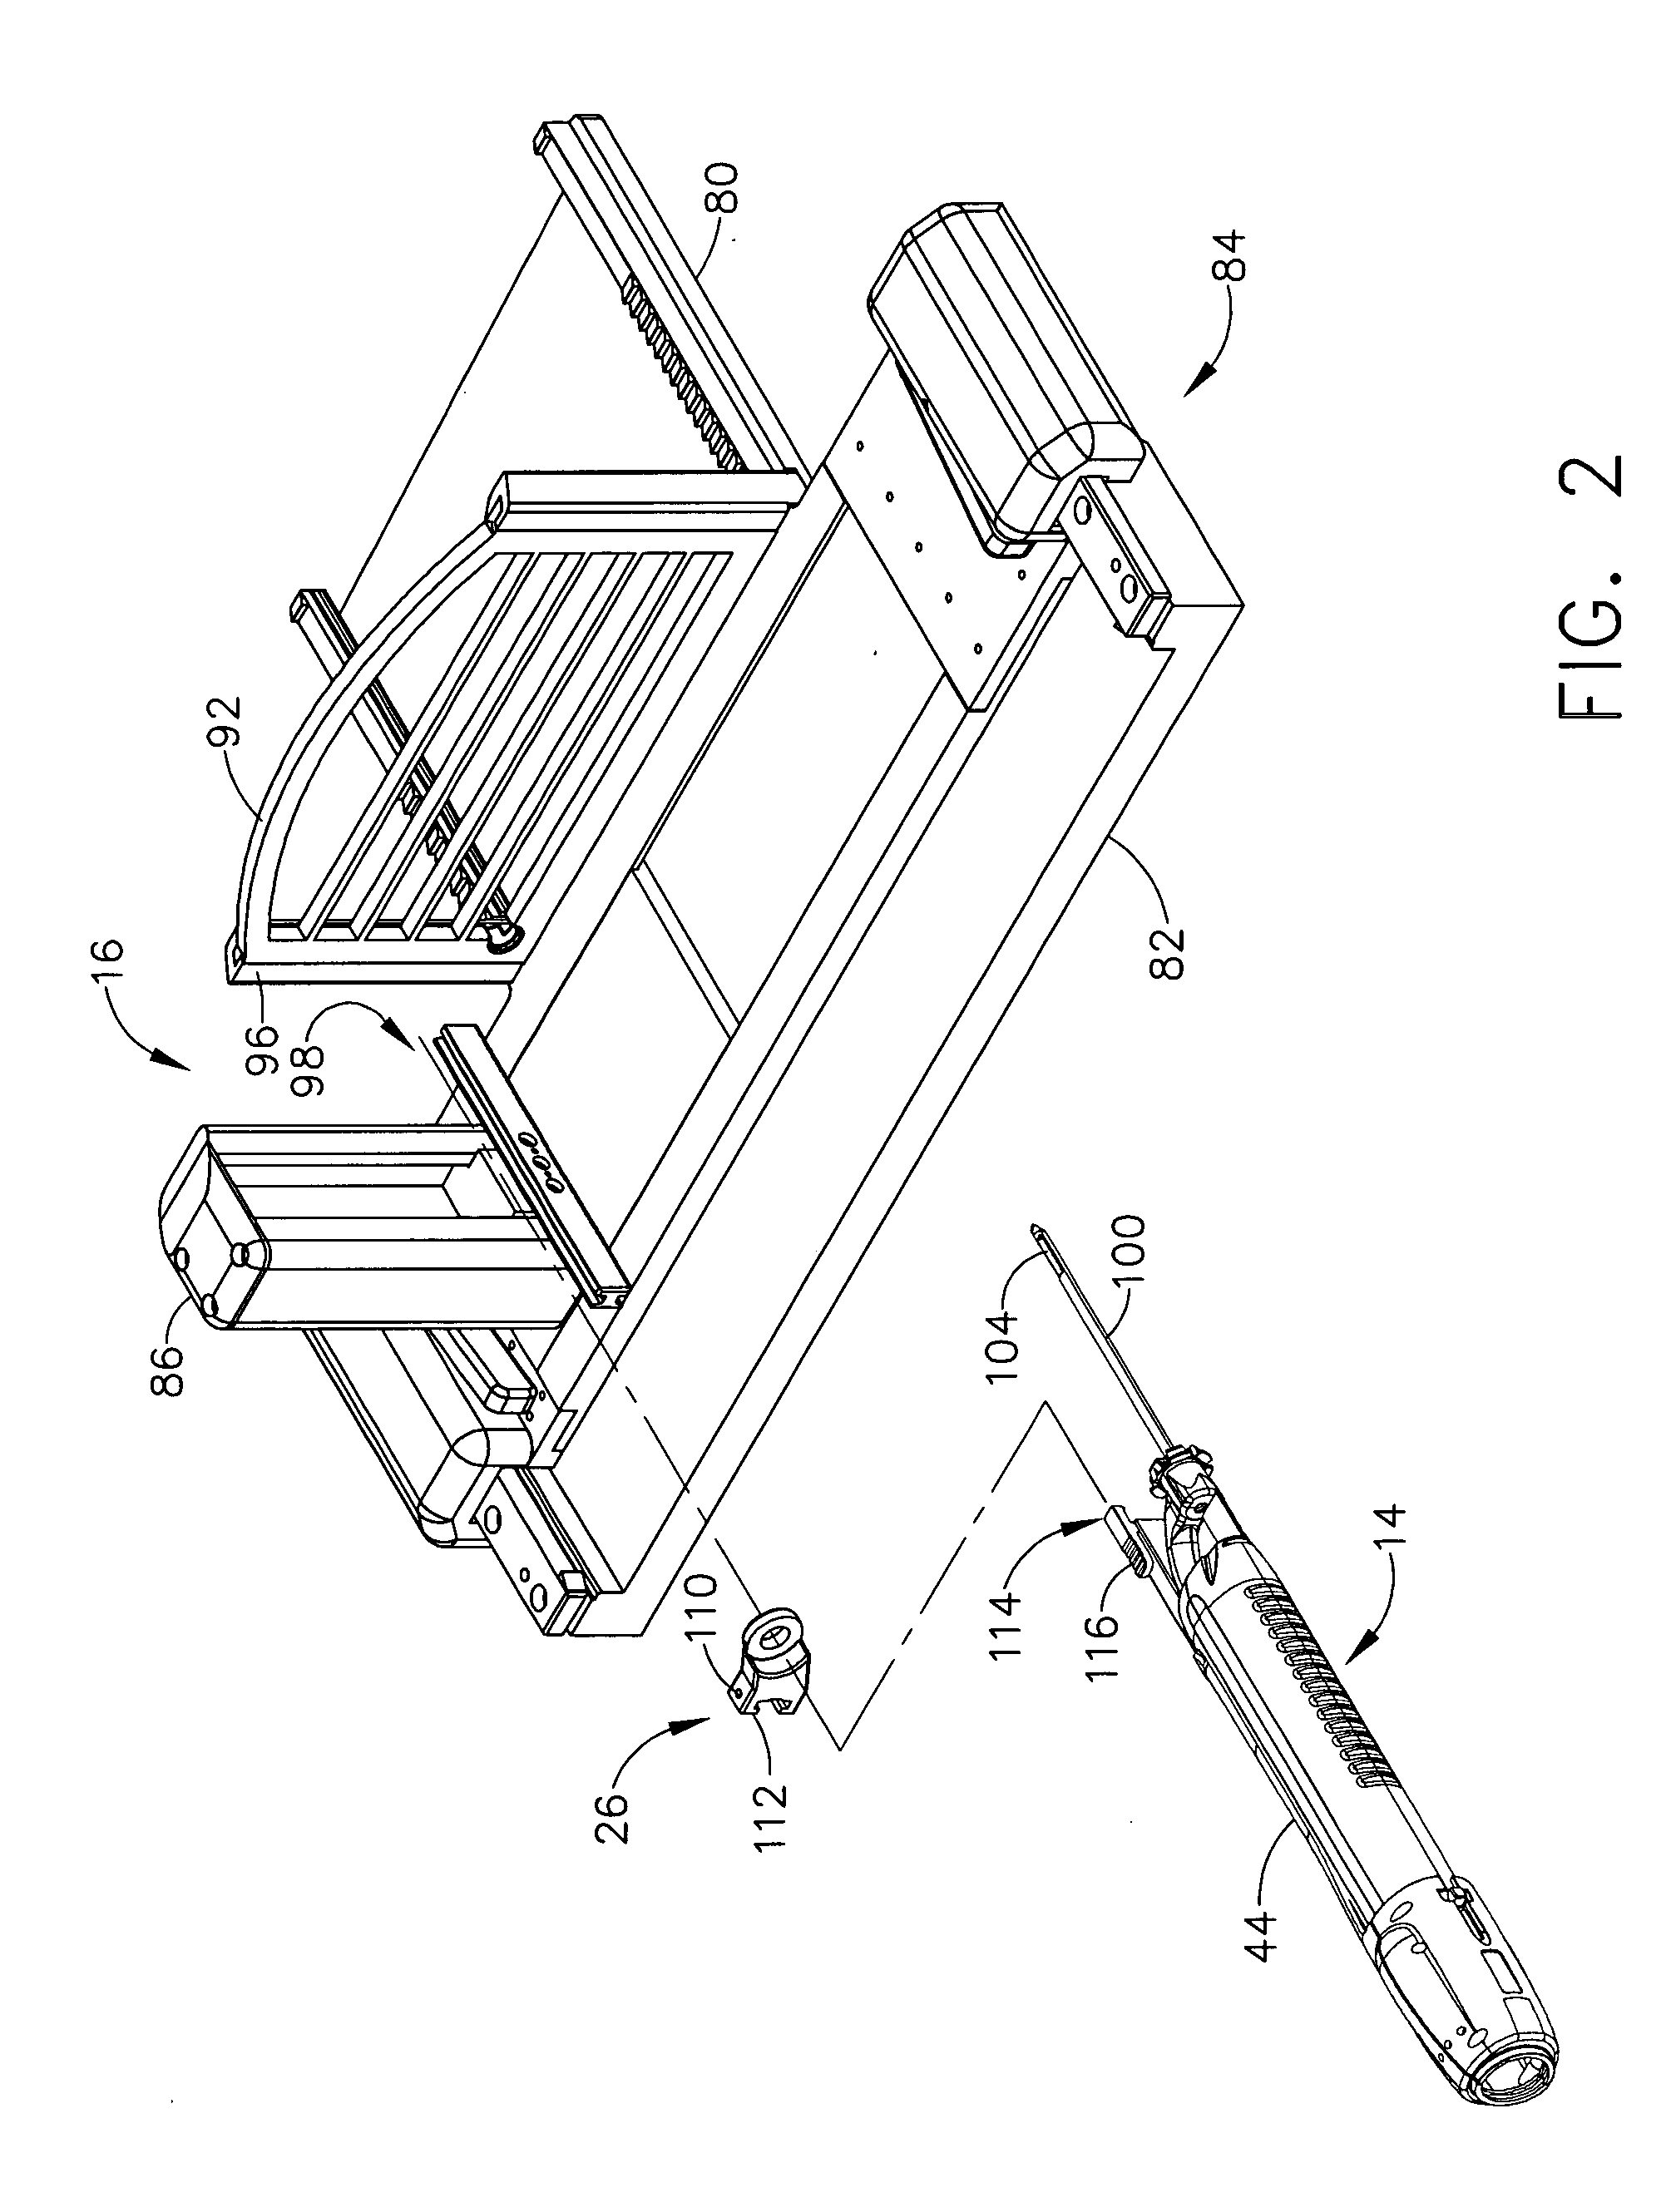 Mri biopsy apparatus incorporating a sleeve and multi-function obturator